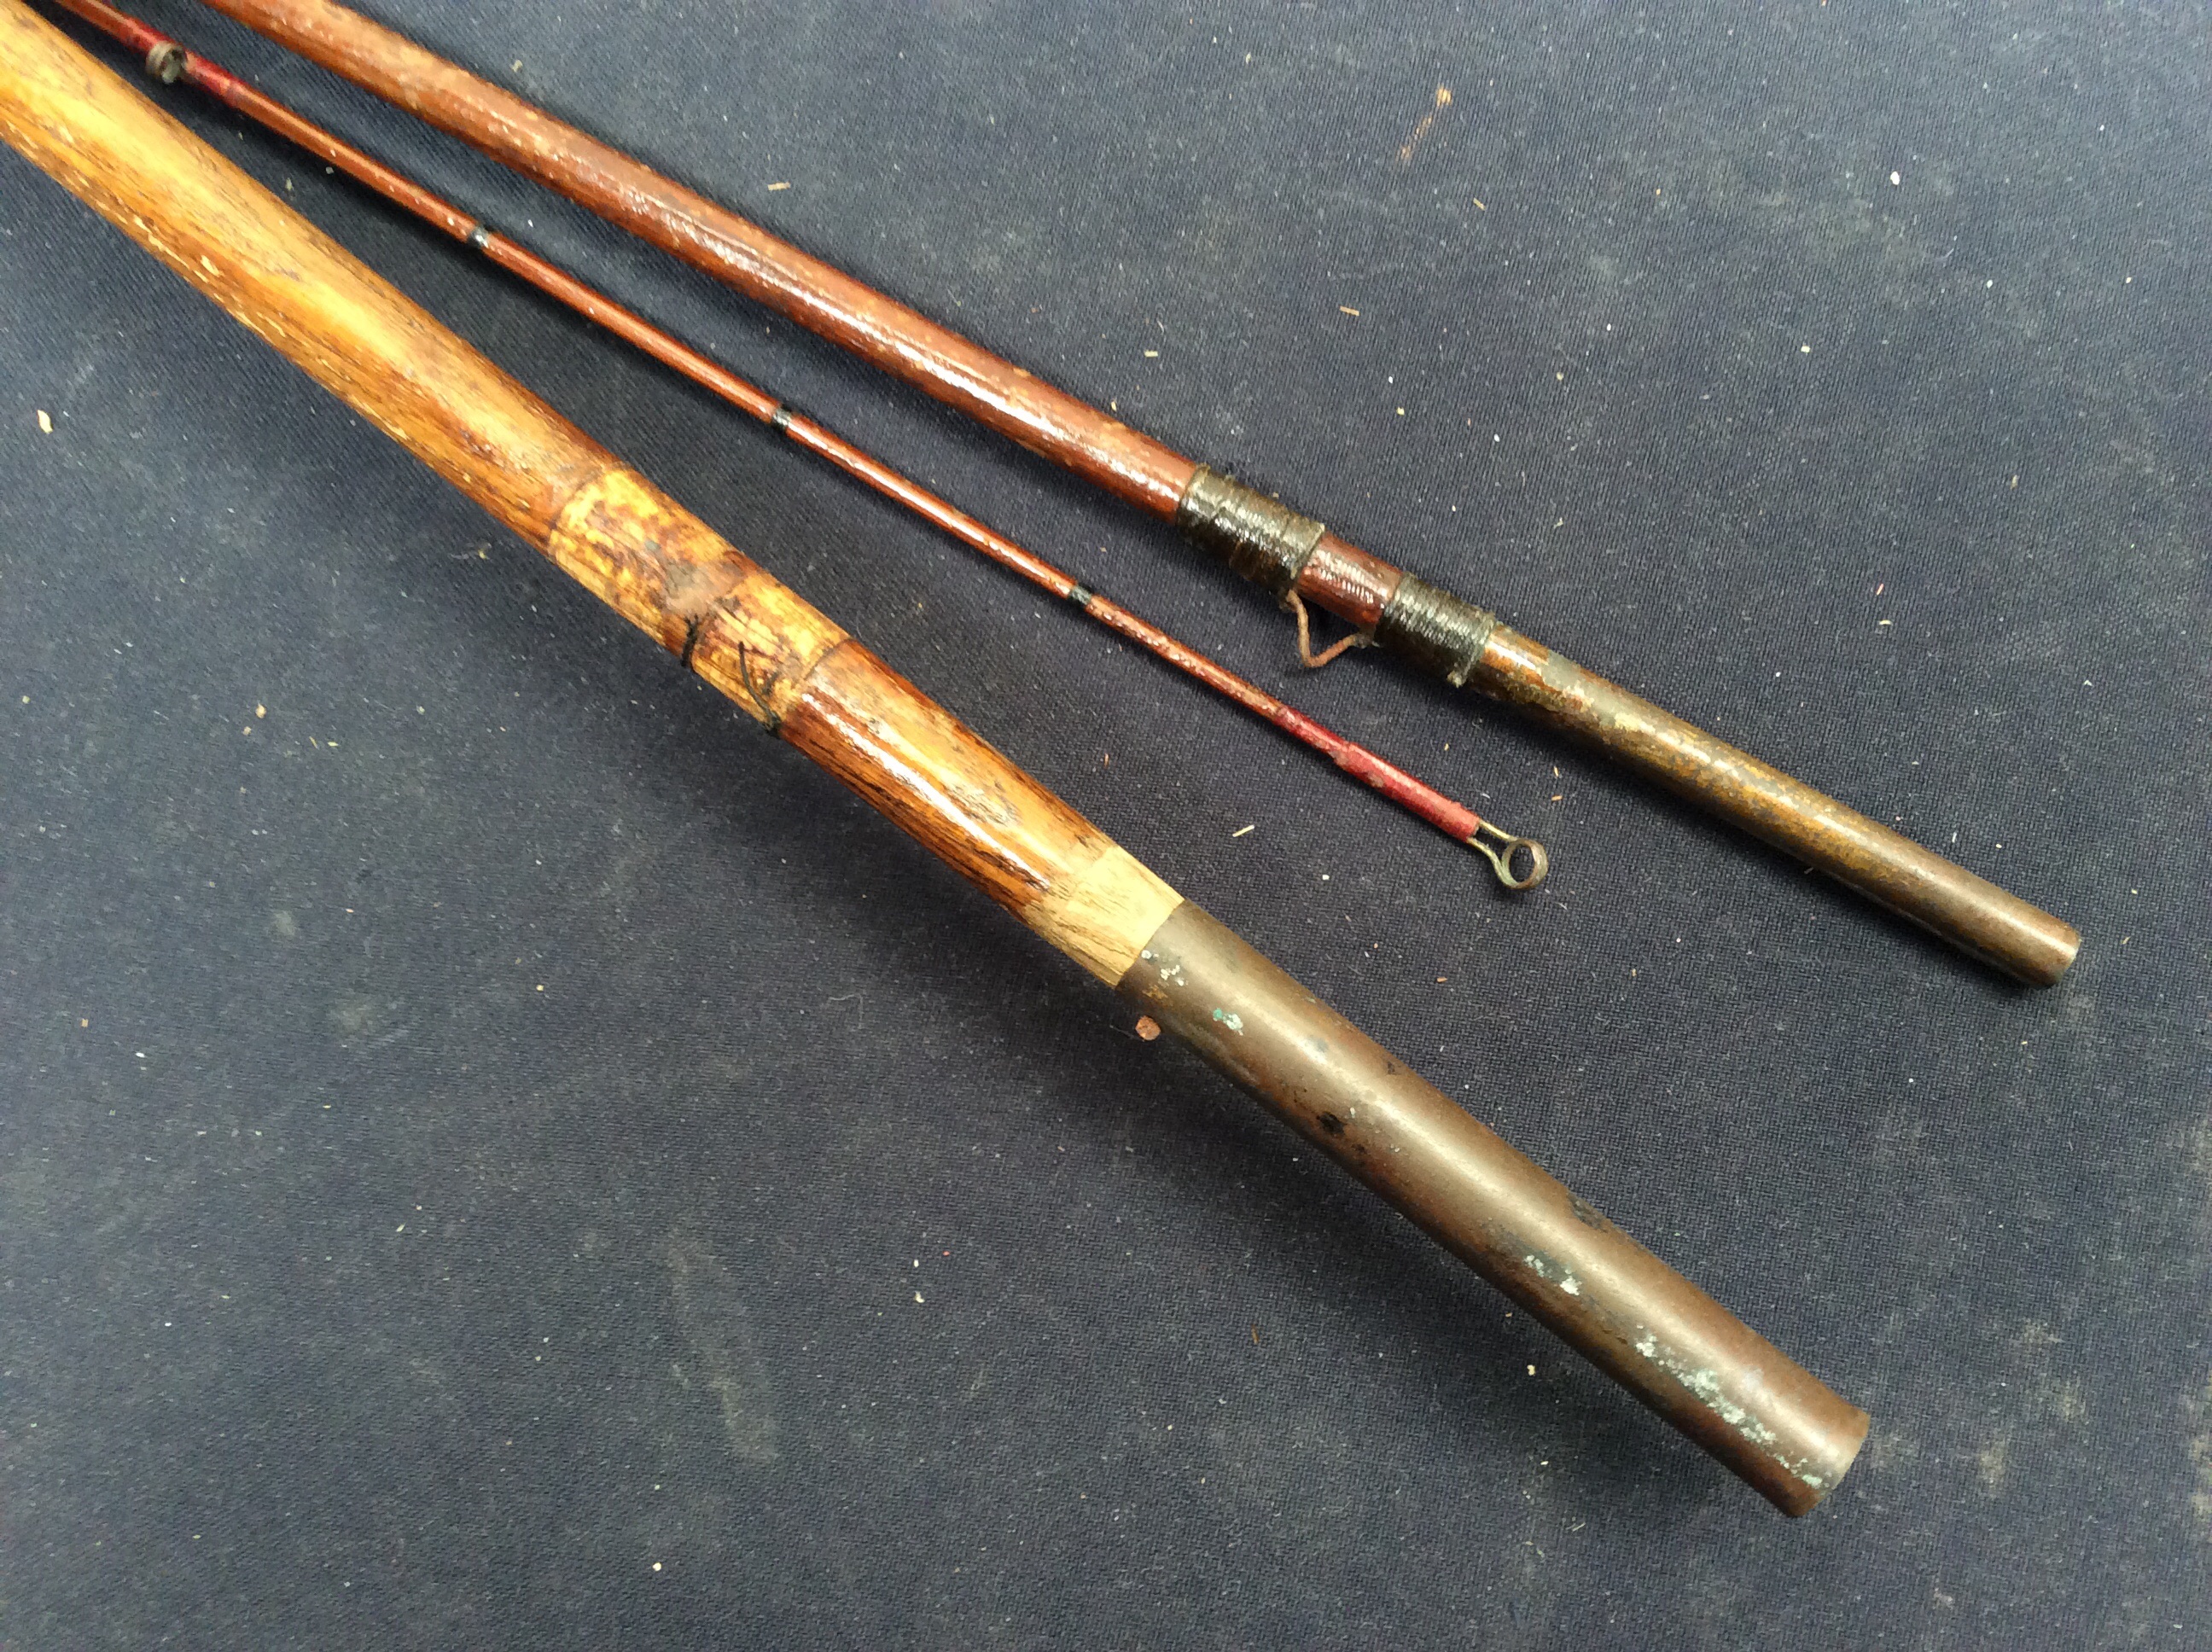 Three early 20th Century fishing reels with nets along with an early 20th Century cane fishing rod. - Image 3 of 3